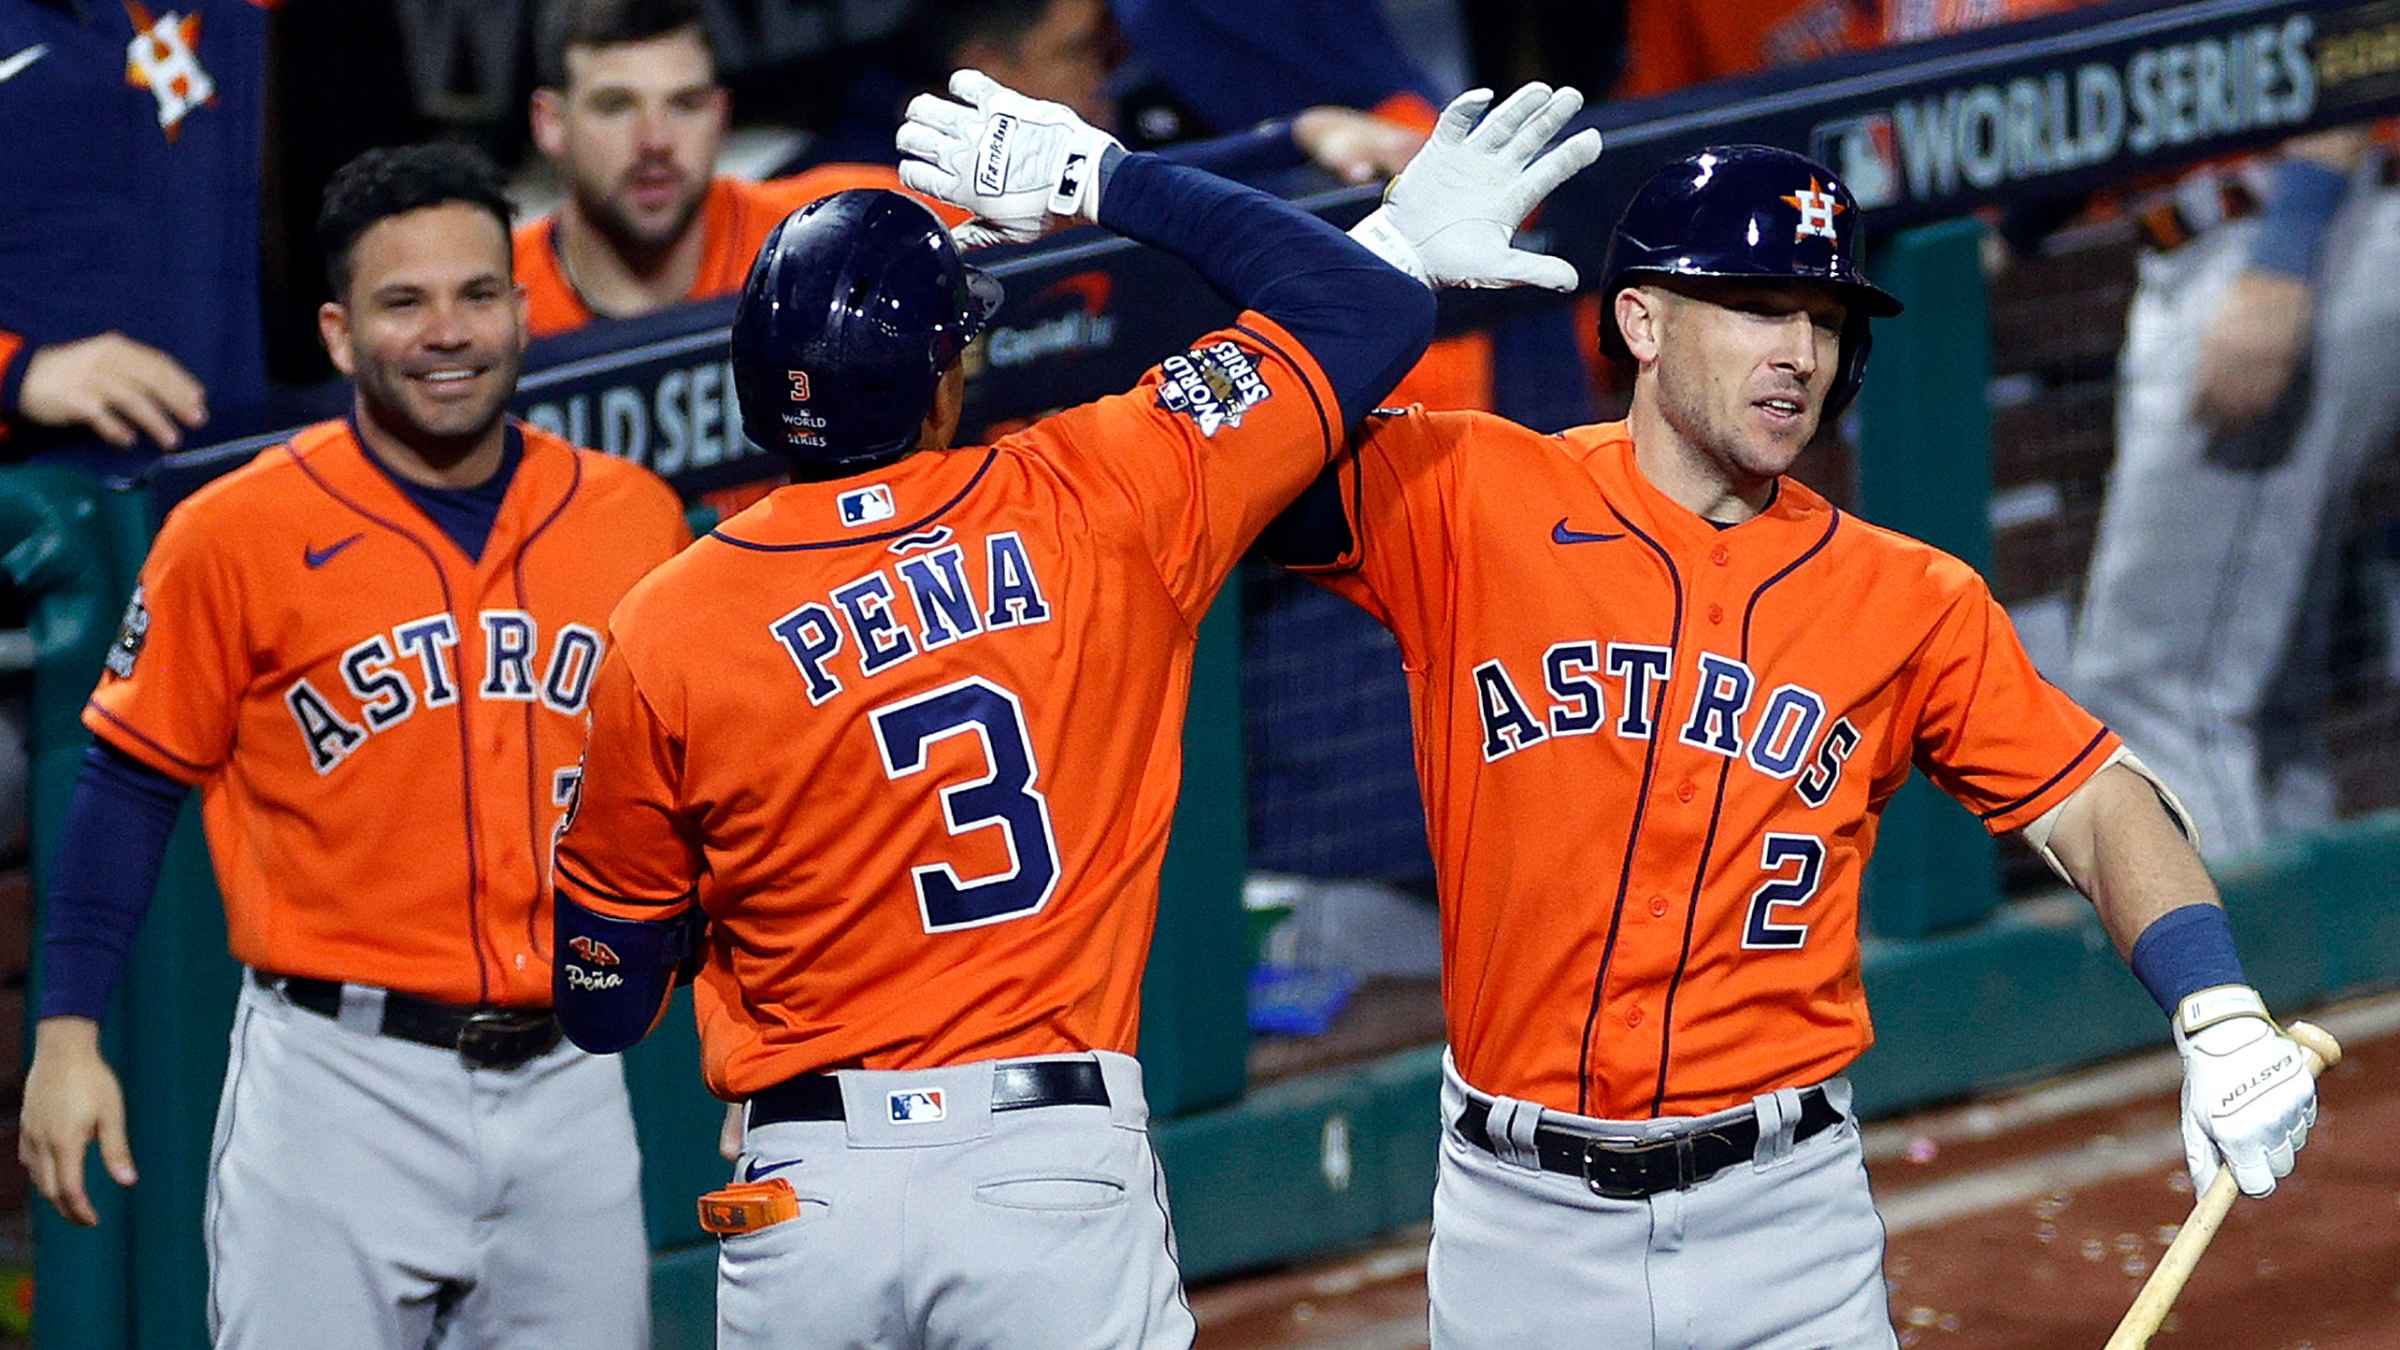 Phillies vs. Astros: World Series Game 5 score, highlights